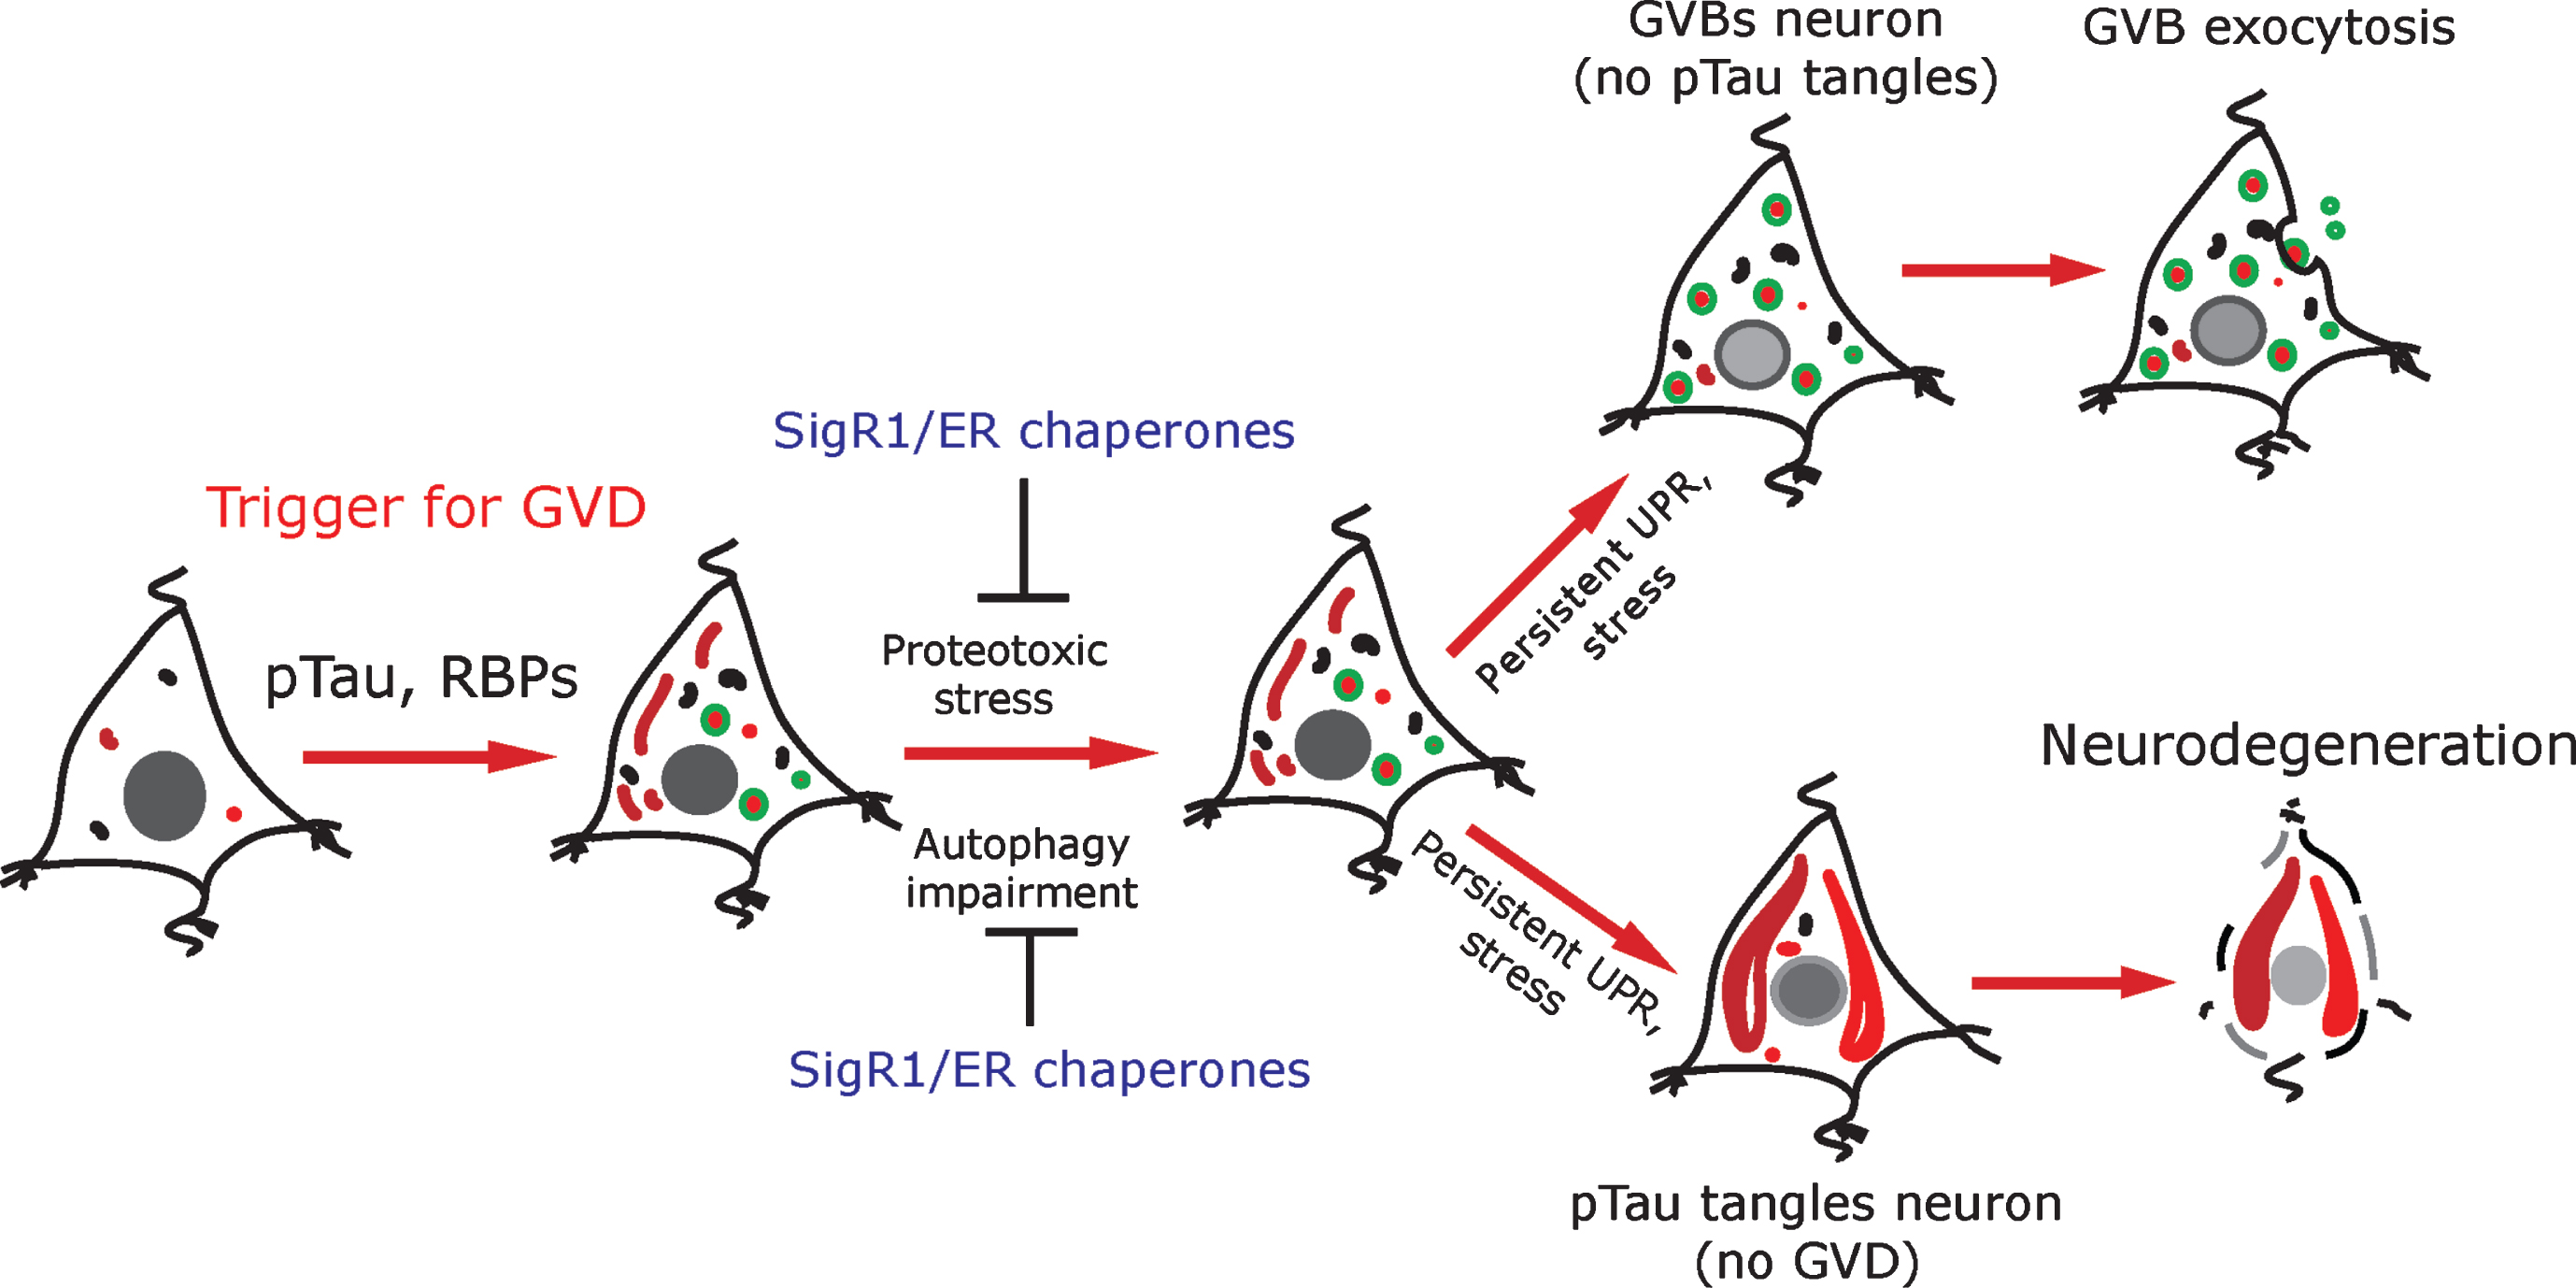 Schematic representation: pTau and RBPs can potentially trigger GVD in AD neurons. GVD affected neurons seldom contain pre-tangle pTau and show an activated UPR. SigR1 and other ER chaperones are elevated to minimize the misfolded protein stress as a protective mechanism. Persistent UPR could potentiate further tau phosphorylation and leads to mature tangle formation and promotes neurodegeneration. On the other hand, neurons with higher load of GVBs do not contain mature tangles. Some GVBs might undergo exocytosis.